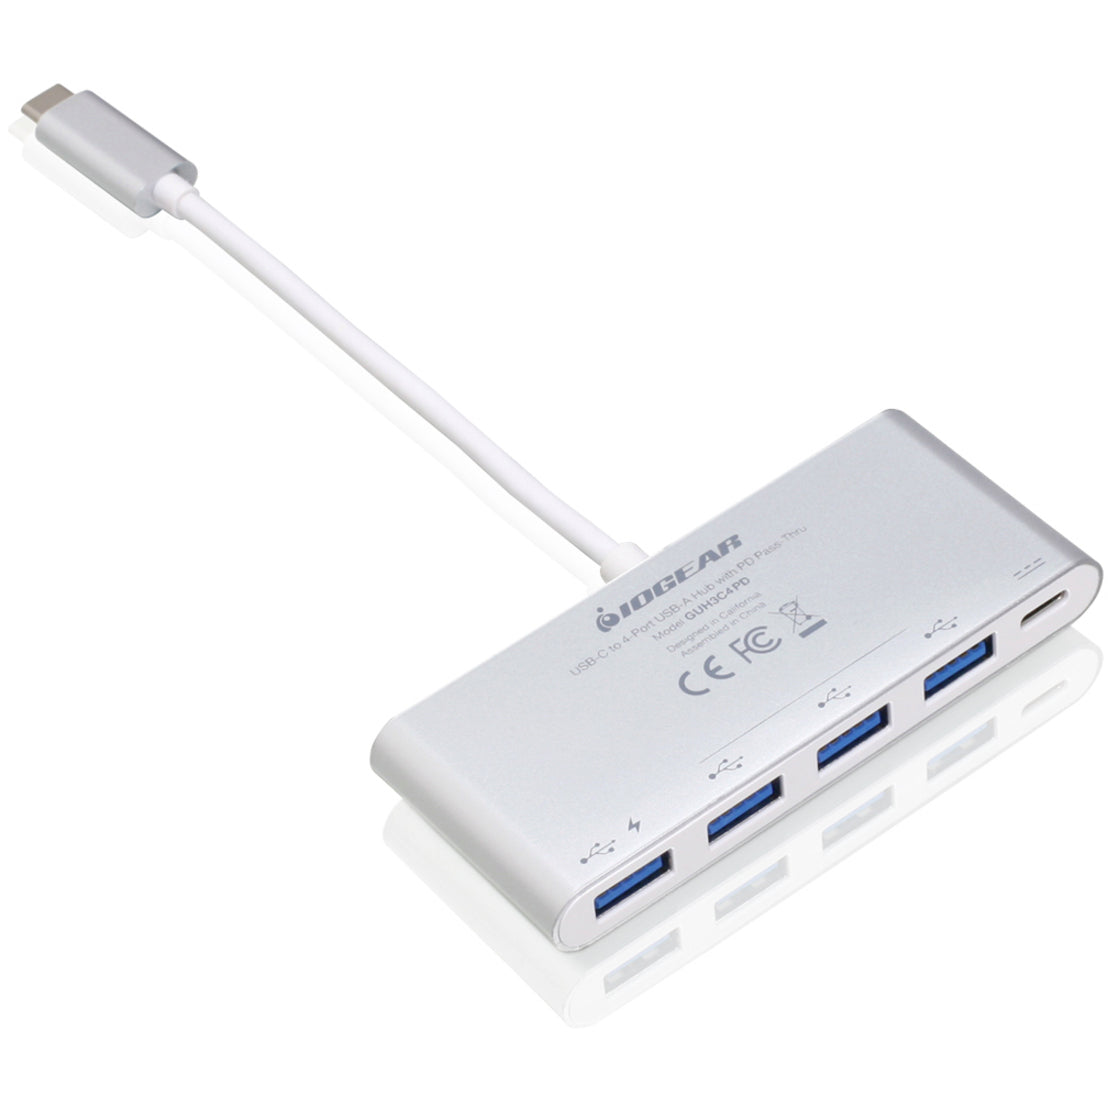 IOGEAR GUH3C4PD USB-C to 4 Port USB-A Hub with Power Delivery Pass-Through, 4 USB 3.0 Ports, Mac/PC Compatible